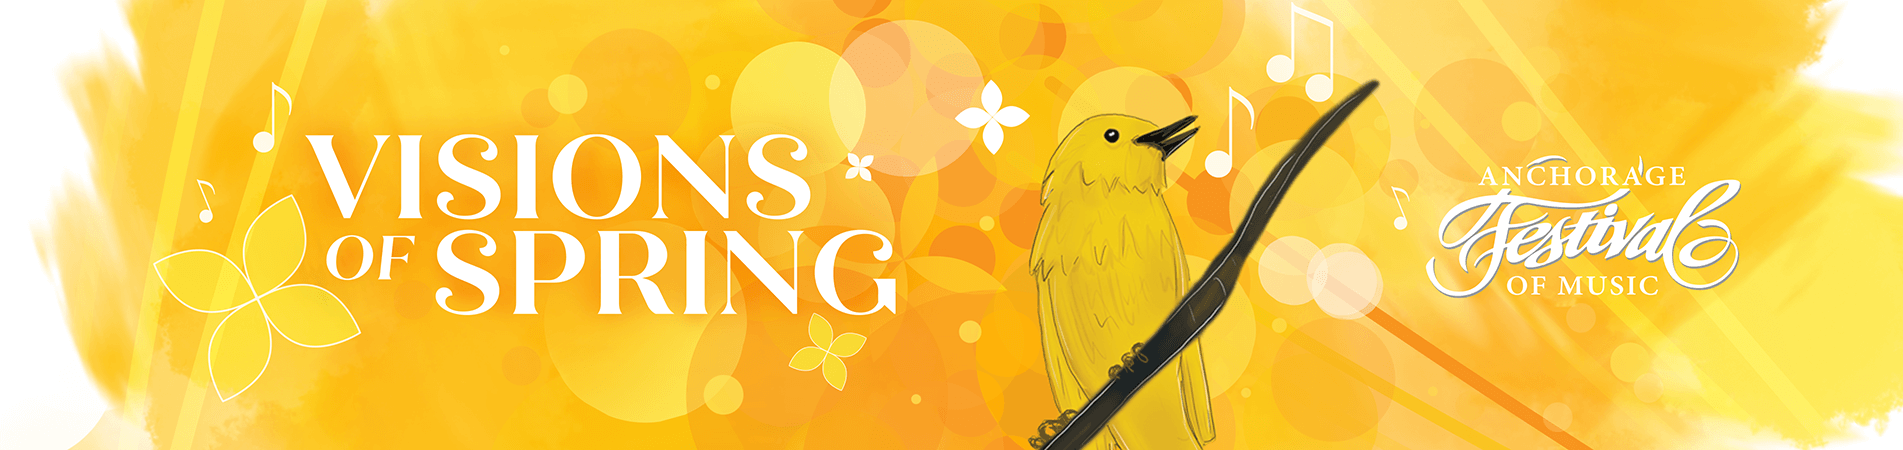 Visions of Spring - A concert of sunshine, birds, love, and renewal